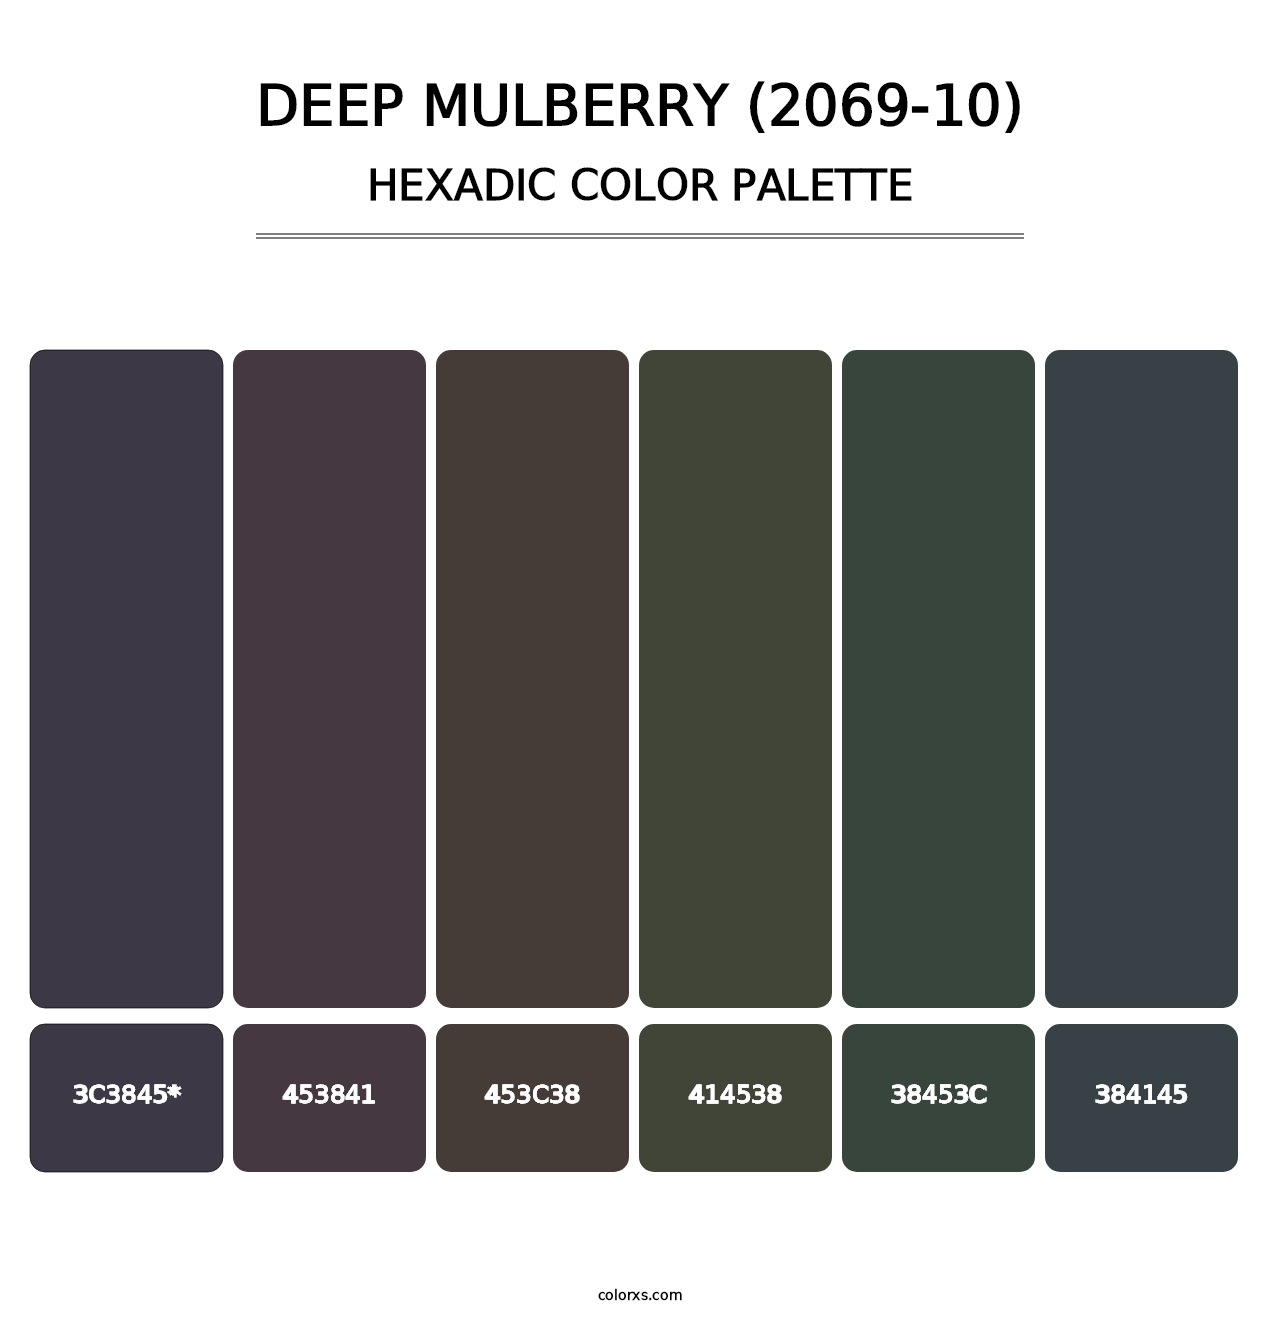 Deep Mulberry (2069-10) - Hexadic Color Palette